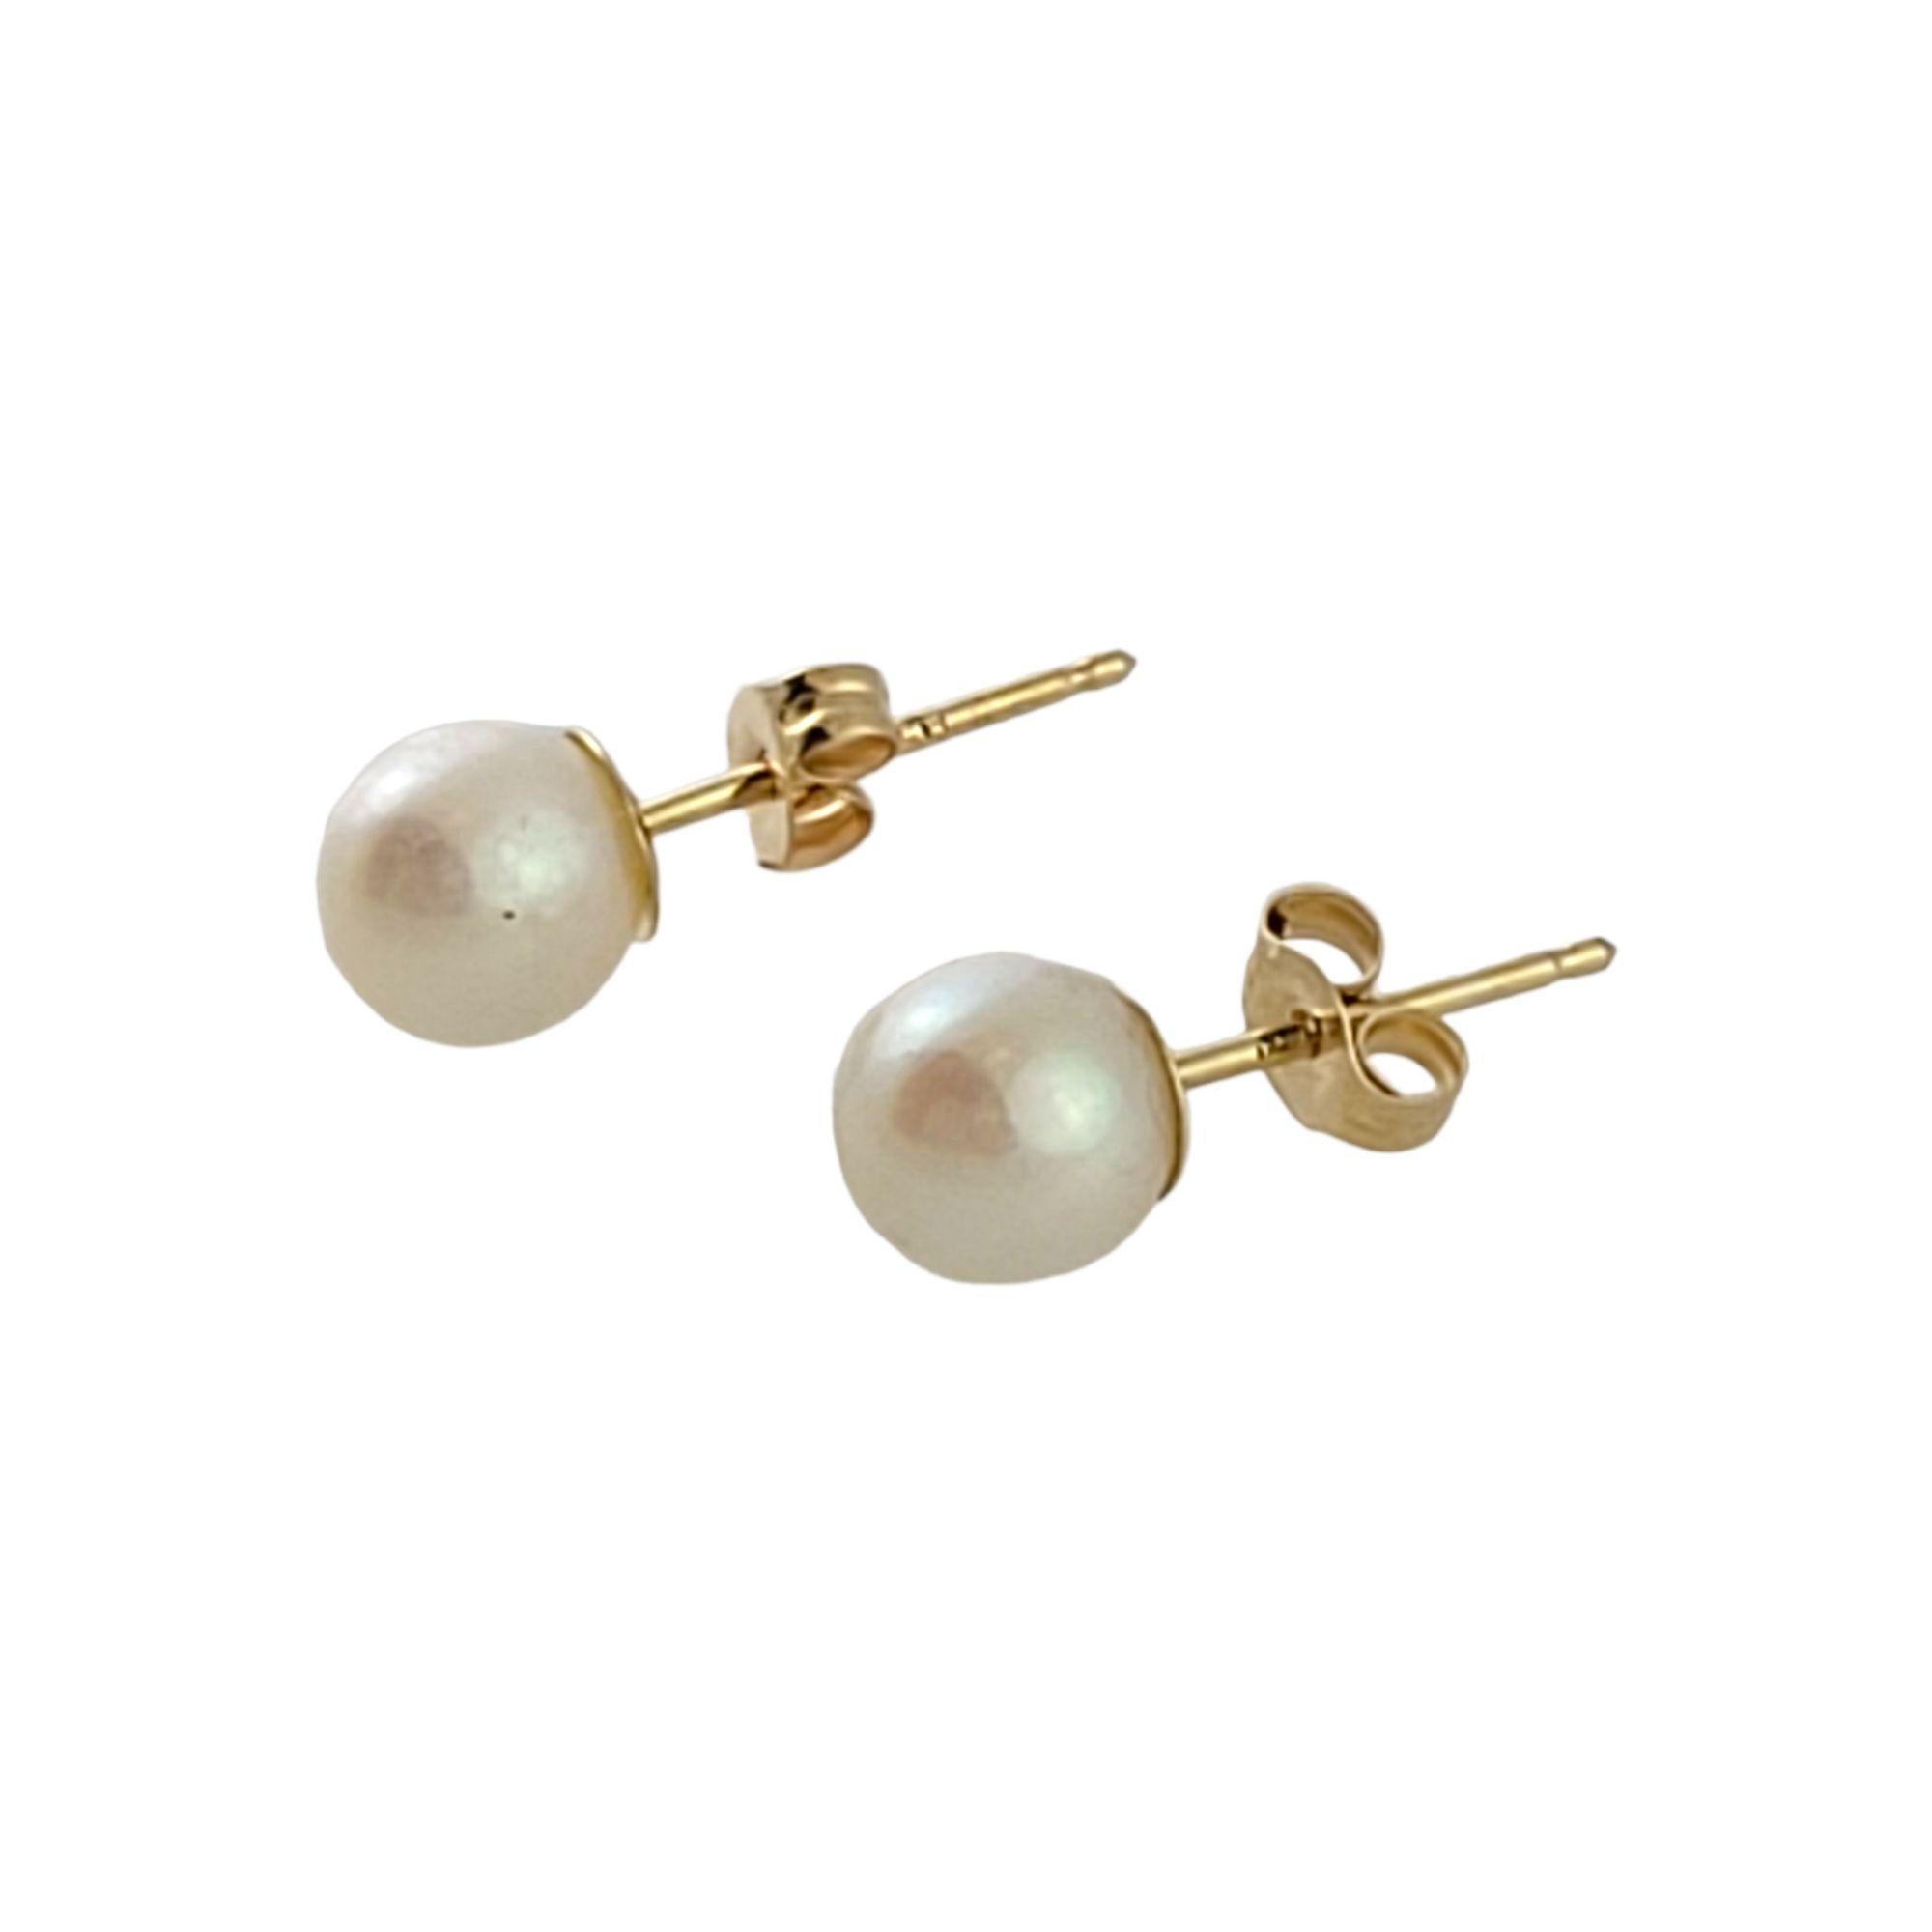 Vintage 14K Yellow Gold Pearl Stud

Beautiful pair of pearl stud earrings with 14K gold posts and backings!

Pearl size: approx. 5.5mm

Weight: 0.4 g/ 0.2 dwt

Hallmark: 14K JCM

Very good condition, professionally polished.

Will come packaged in a